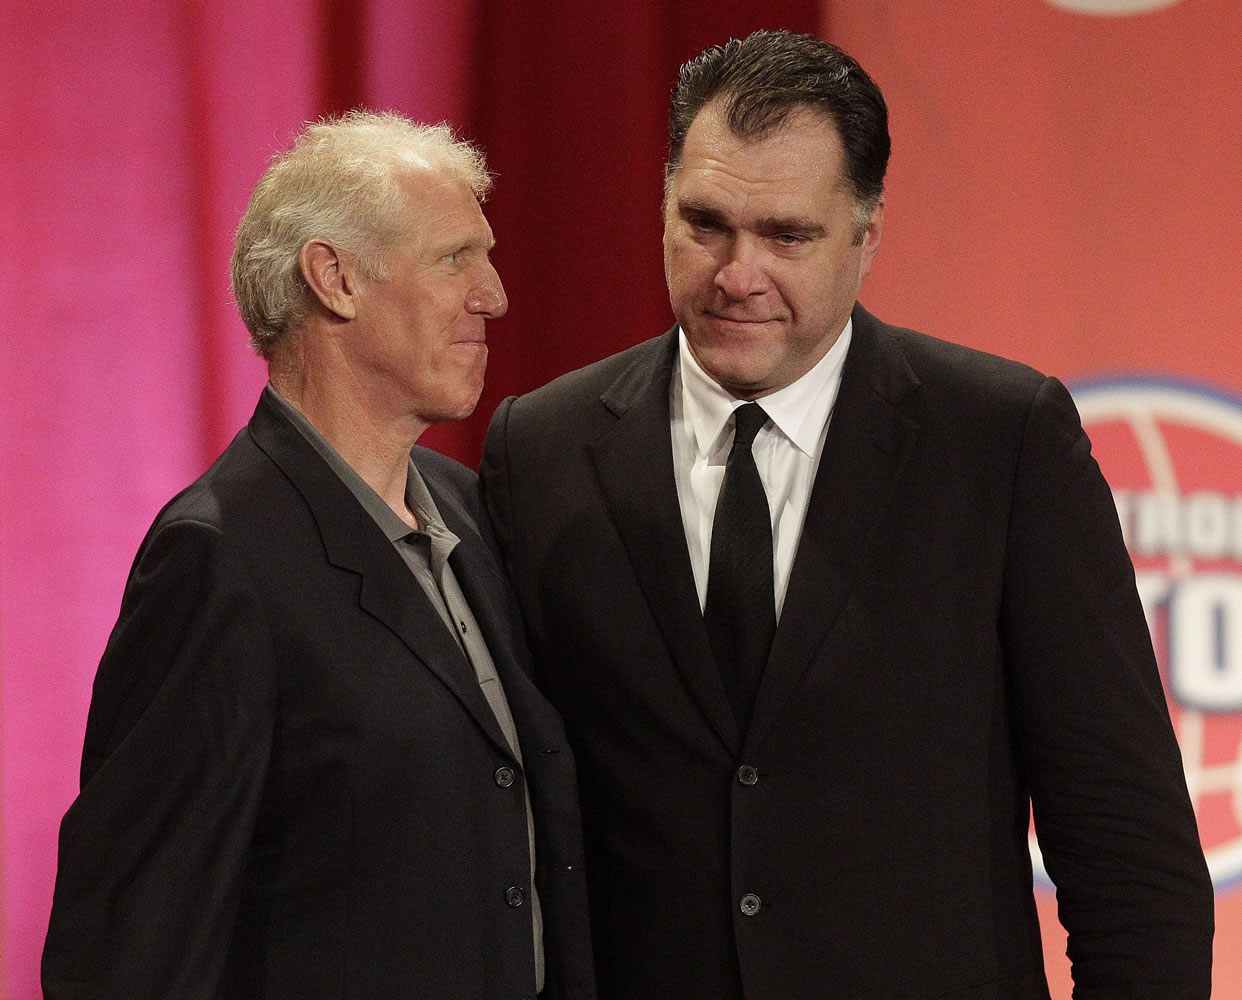 Arvydas Sabonis, right, walks off the stage with his presenter Bill Walton at a Basketball Hall of Fame enshrinement ceremony in Springfield, Mass., last Friday.